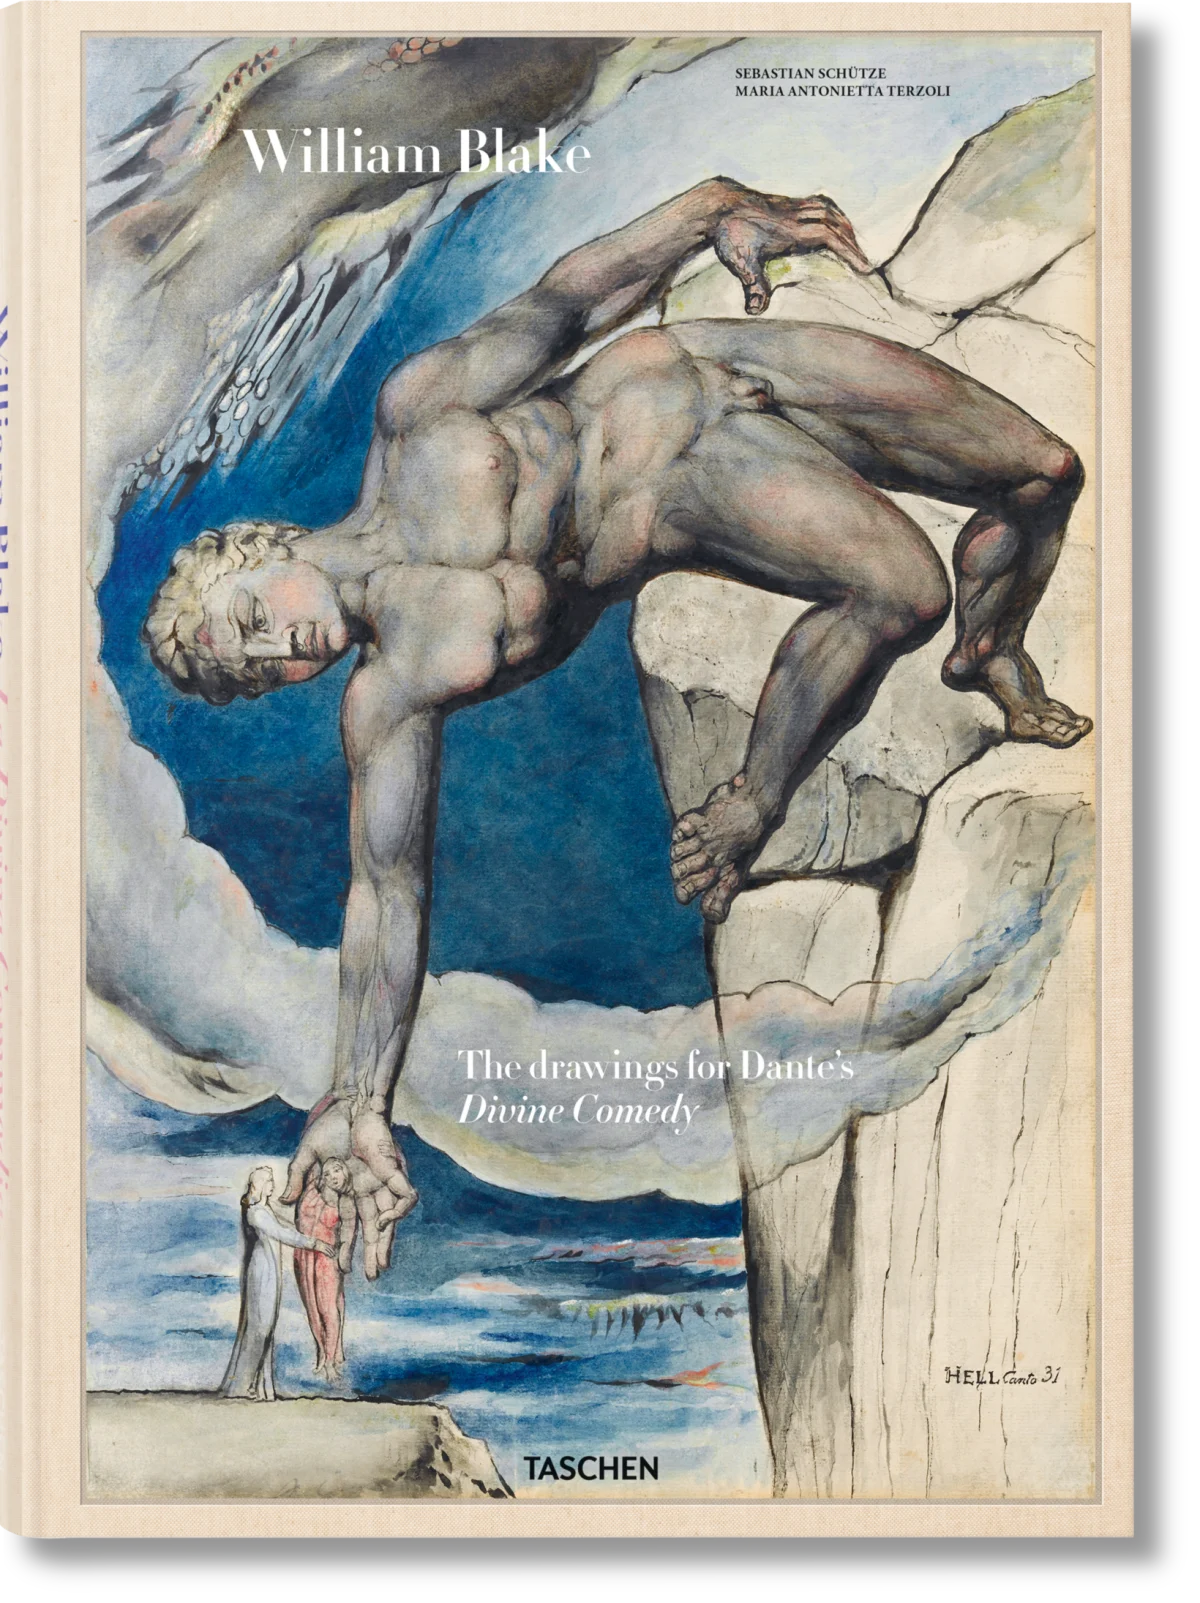 William Blake. The drawings for Dante’s Divine Comedy